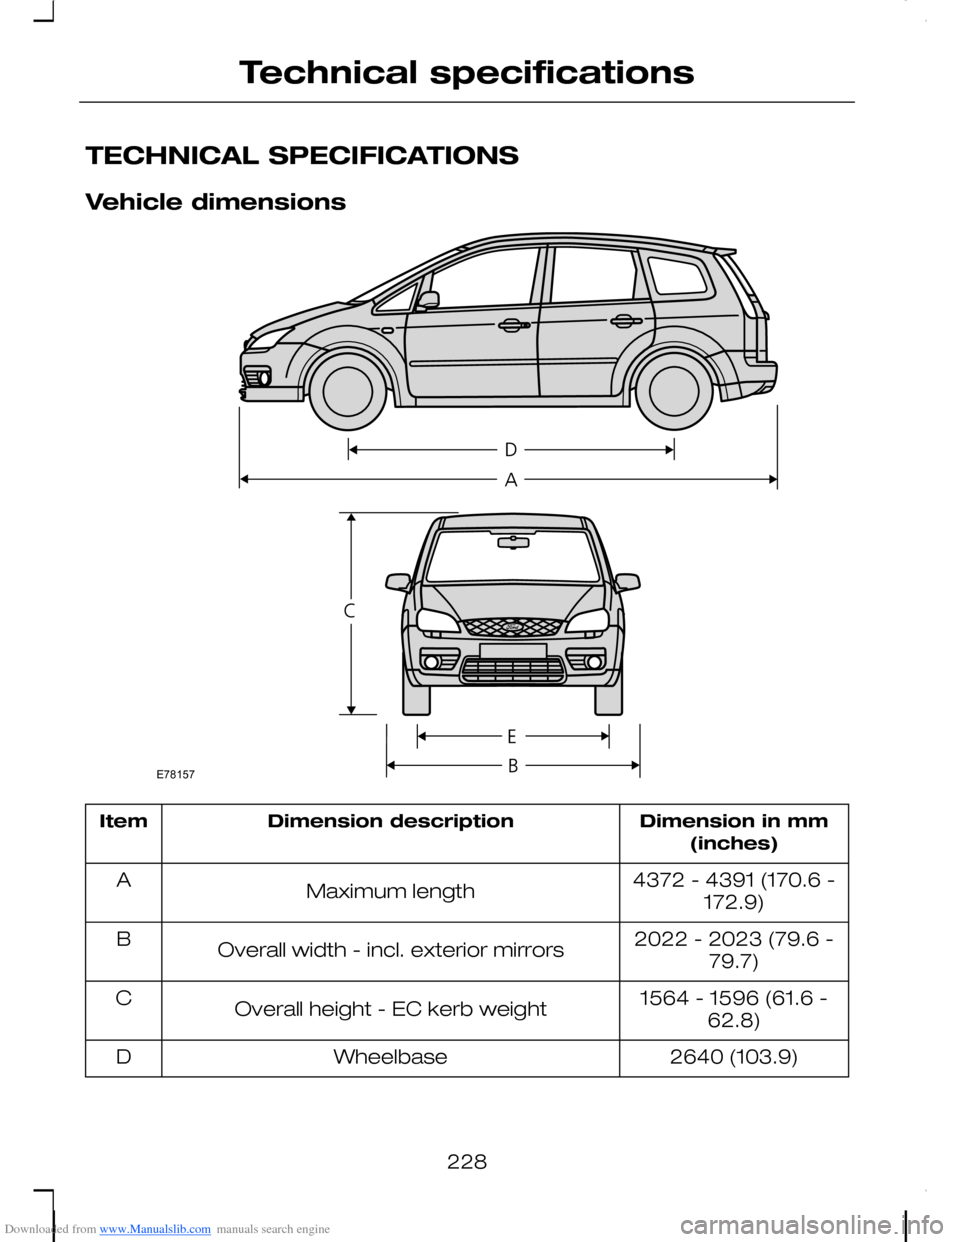 FORD C MAX 2008 1.G Owners Manual Downloaded from www.Manualslib.com manuals search engine TECHNICAL SPECIFICATIONS
Vehicle dimensions
Dimension in mm(inches)Dimension descriptionItem
4372 - 4391 (170.6 -172.9)Maximum lengthA
2022 - 2